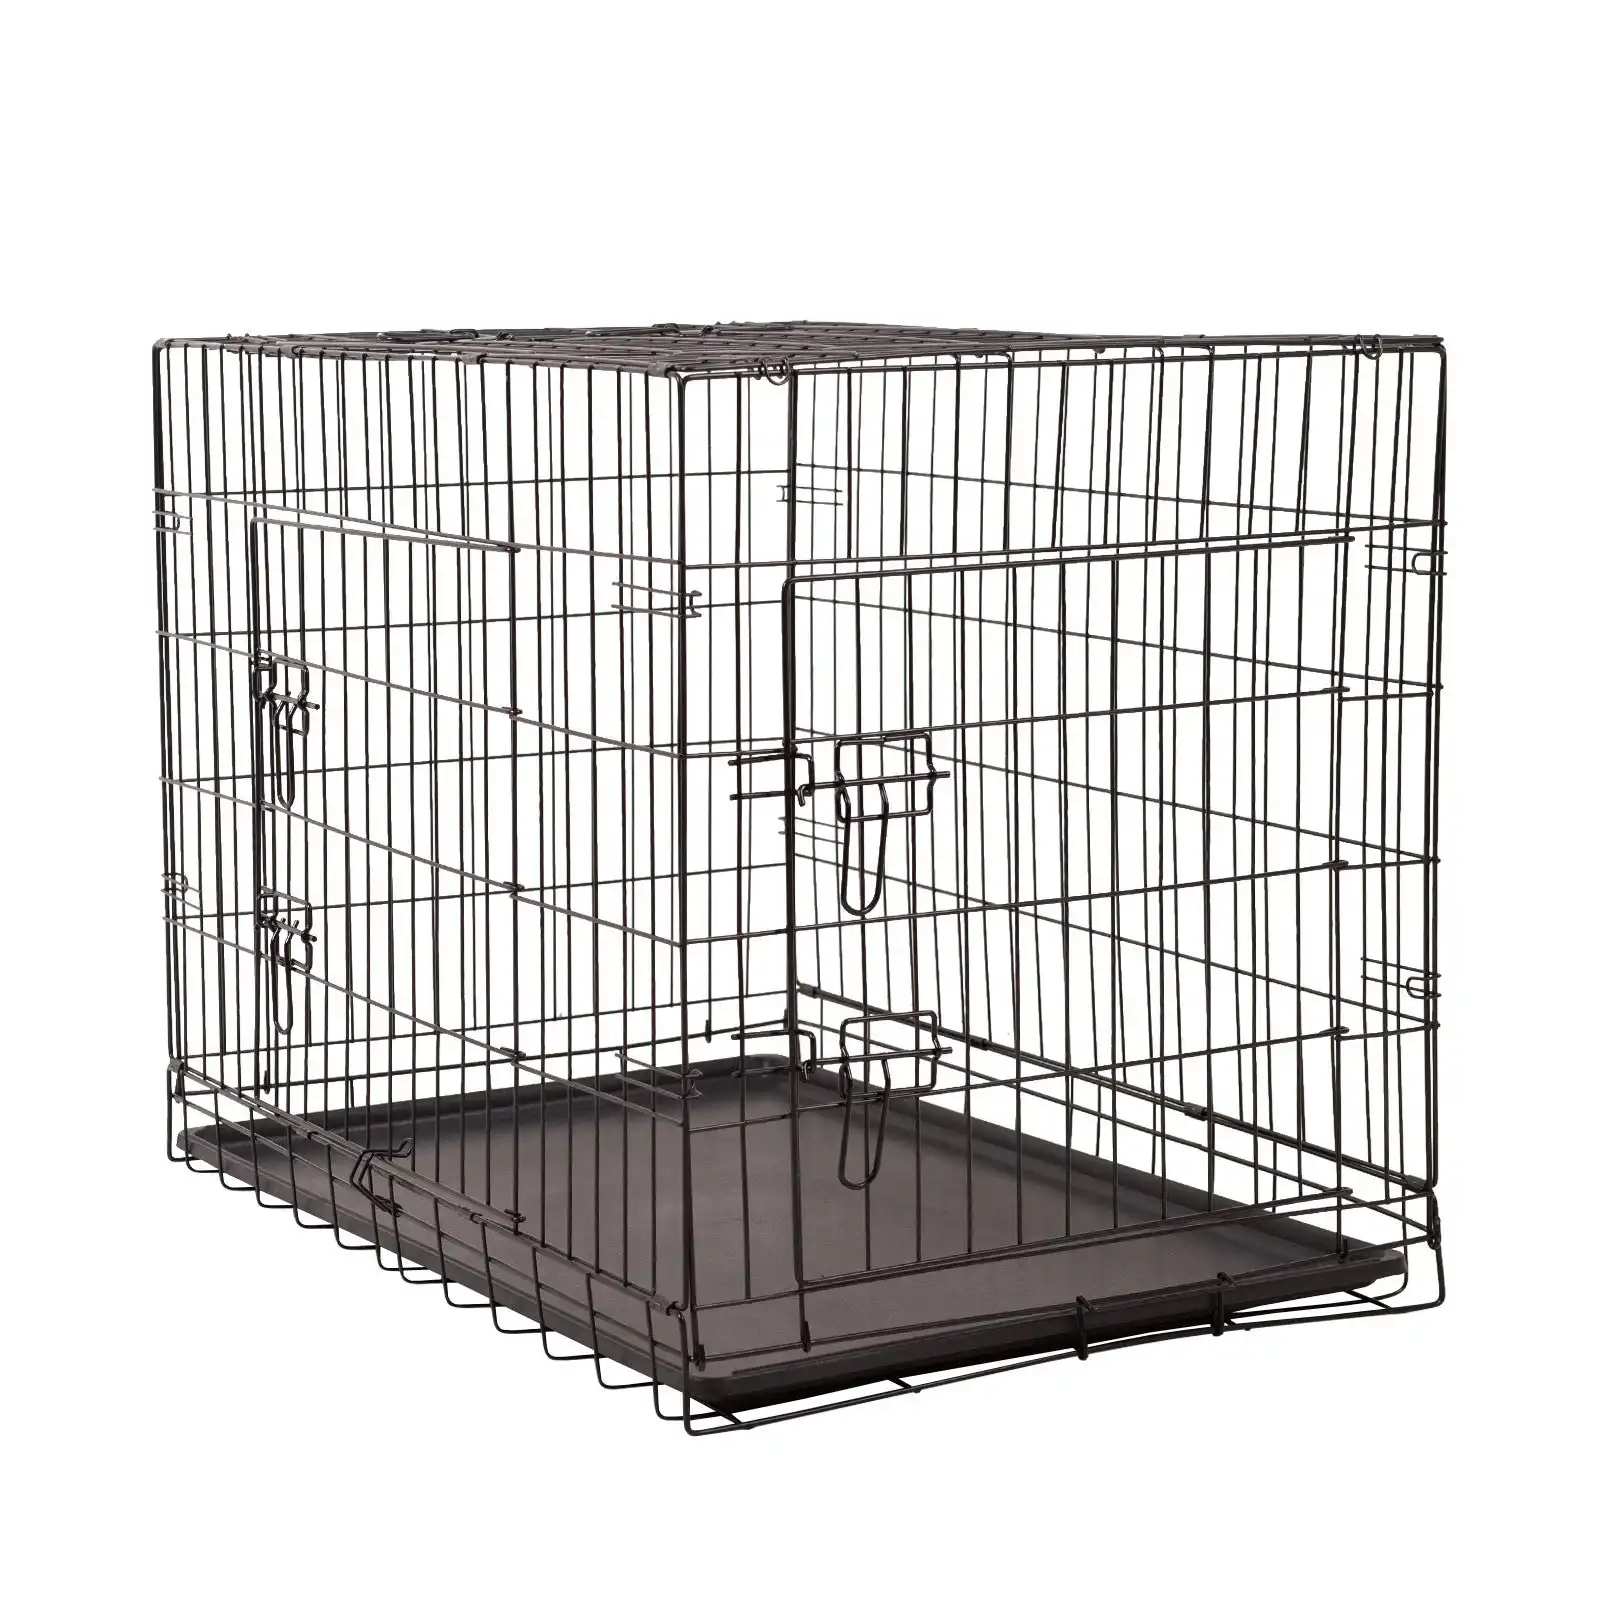 4Paws Dog Cage Pet Crate Cat Puppy Metal Cage ABS Tray Foldable Portable Black